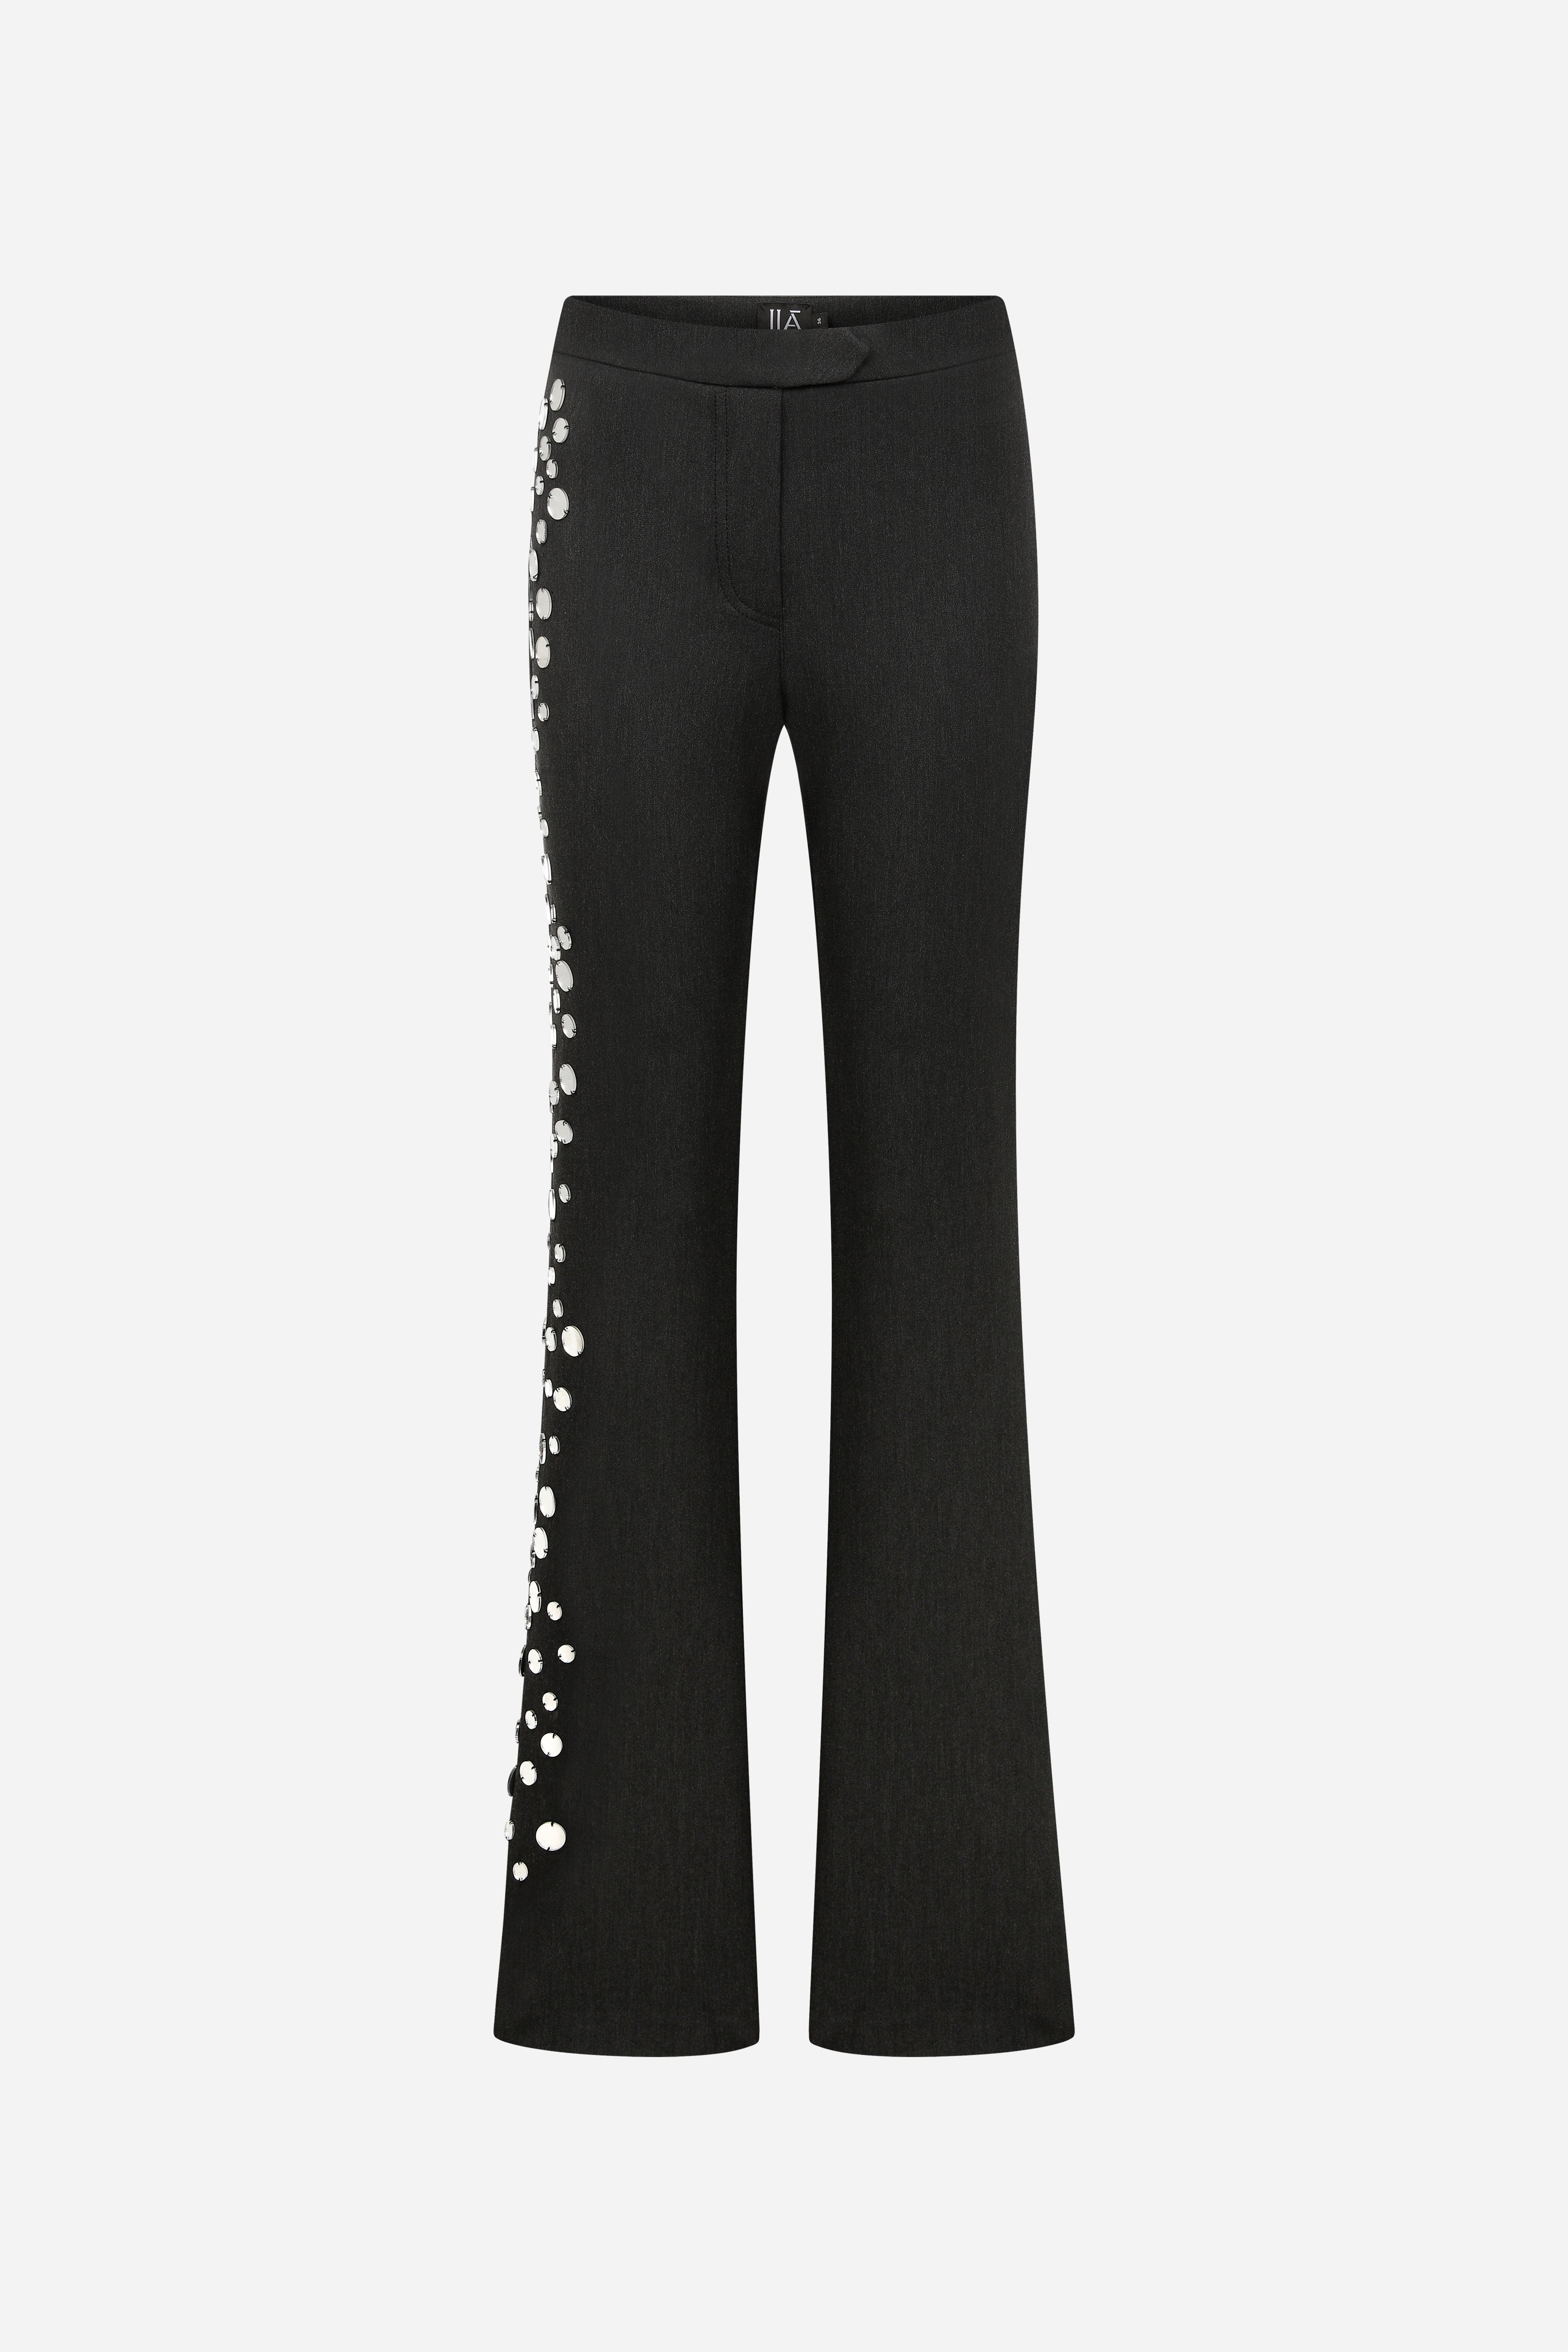 Nikki - Trousers With Mirror Details